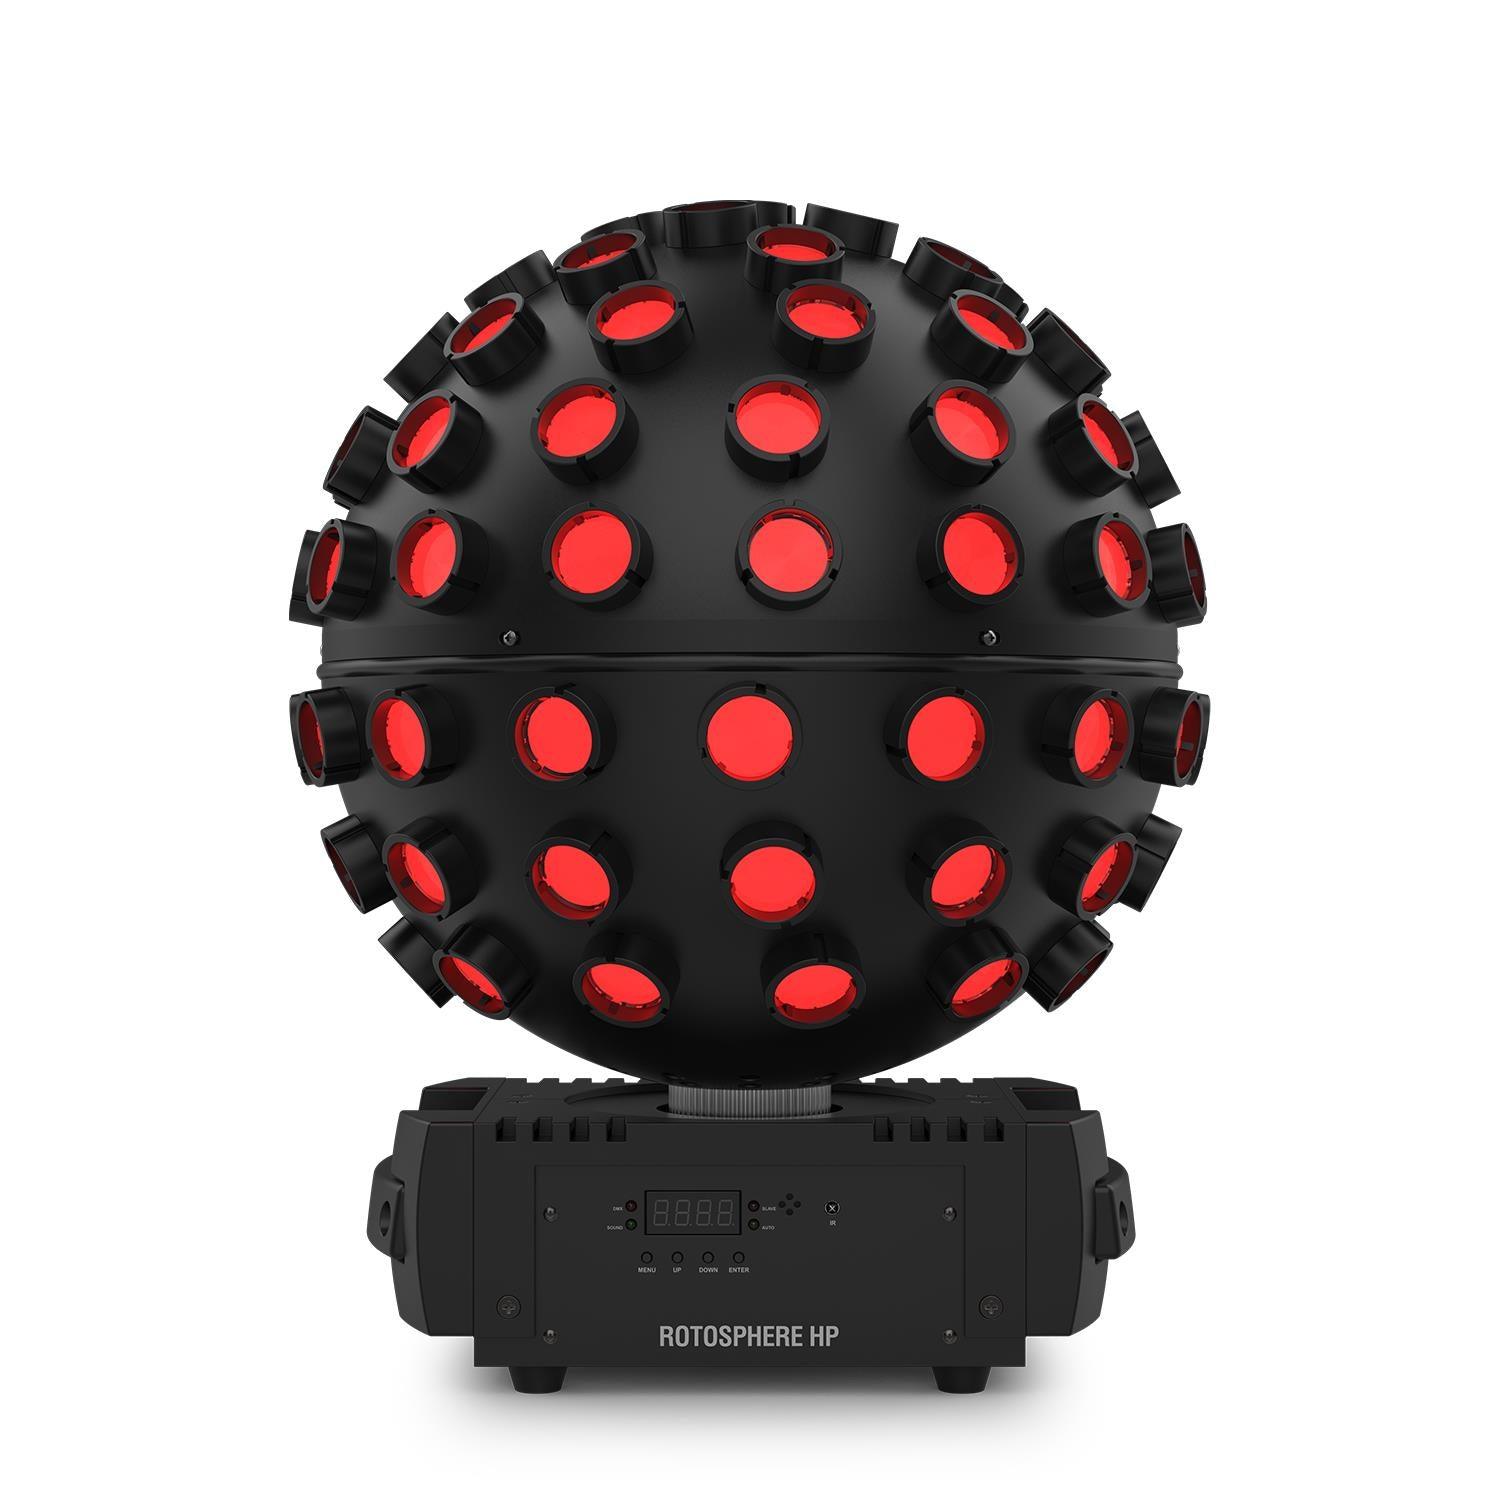 2 x Chauvet DJ Rotosphere HP Quad Colour Sphere Mirror Ball with DMX Cable and Carry Bags - DY Pro Audio